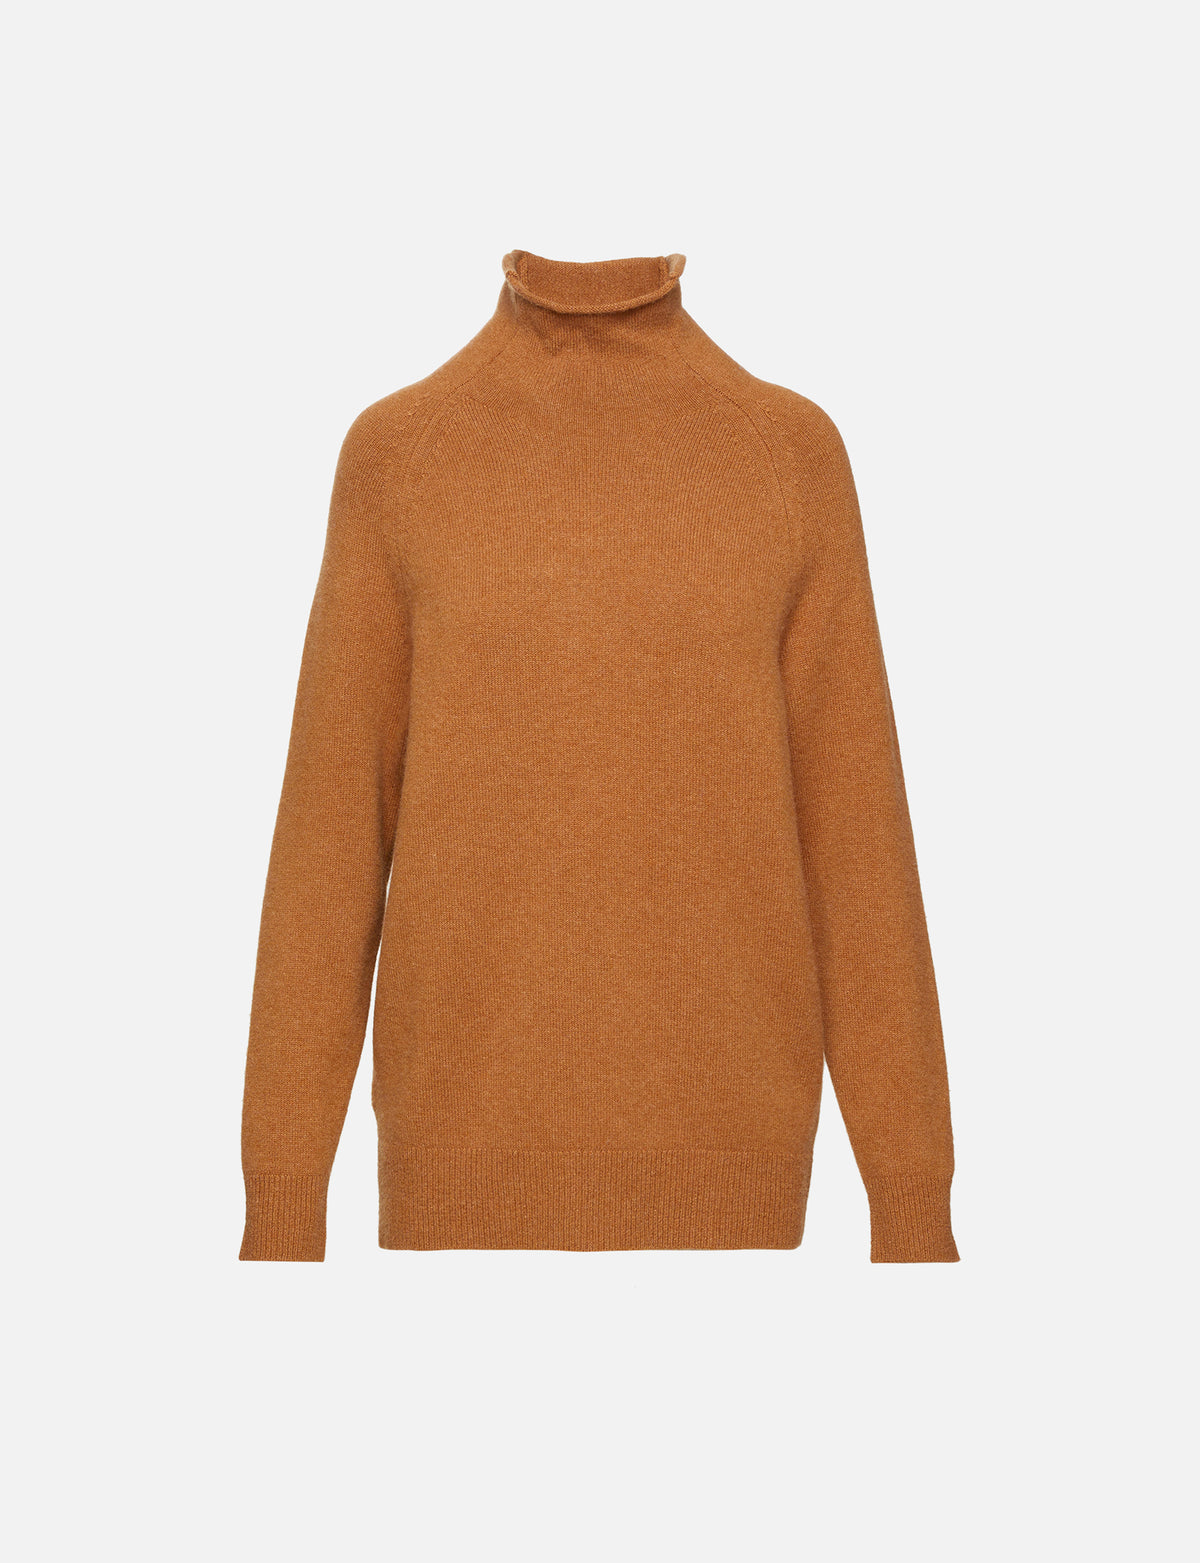 view 1 - Funnel Neck Pullover